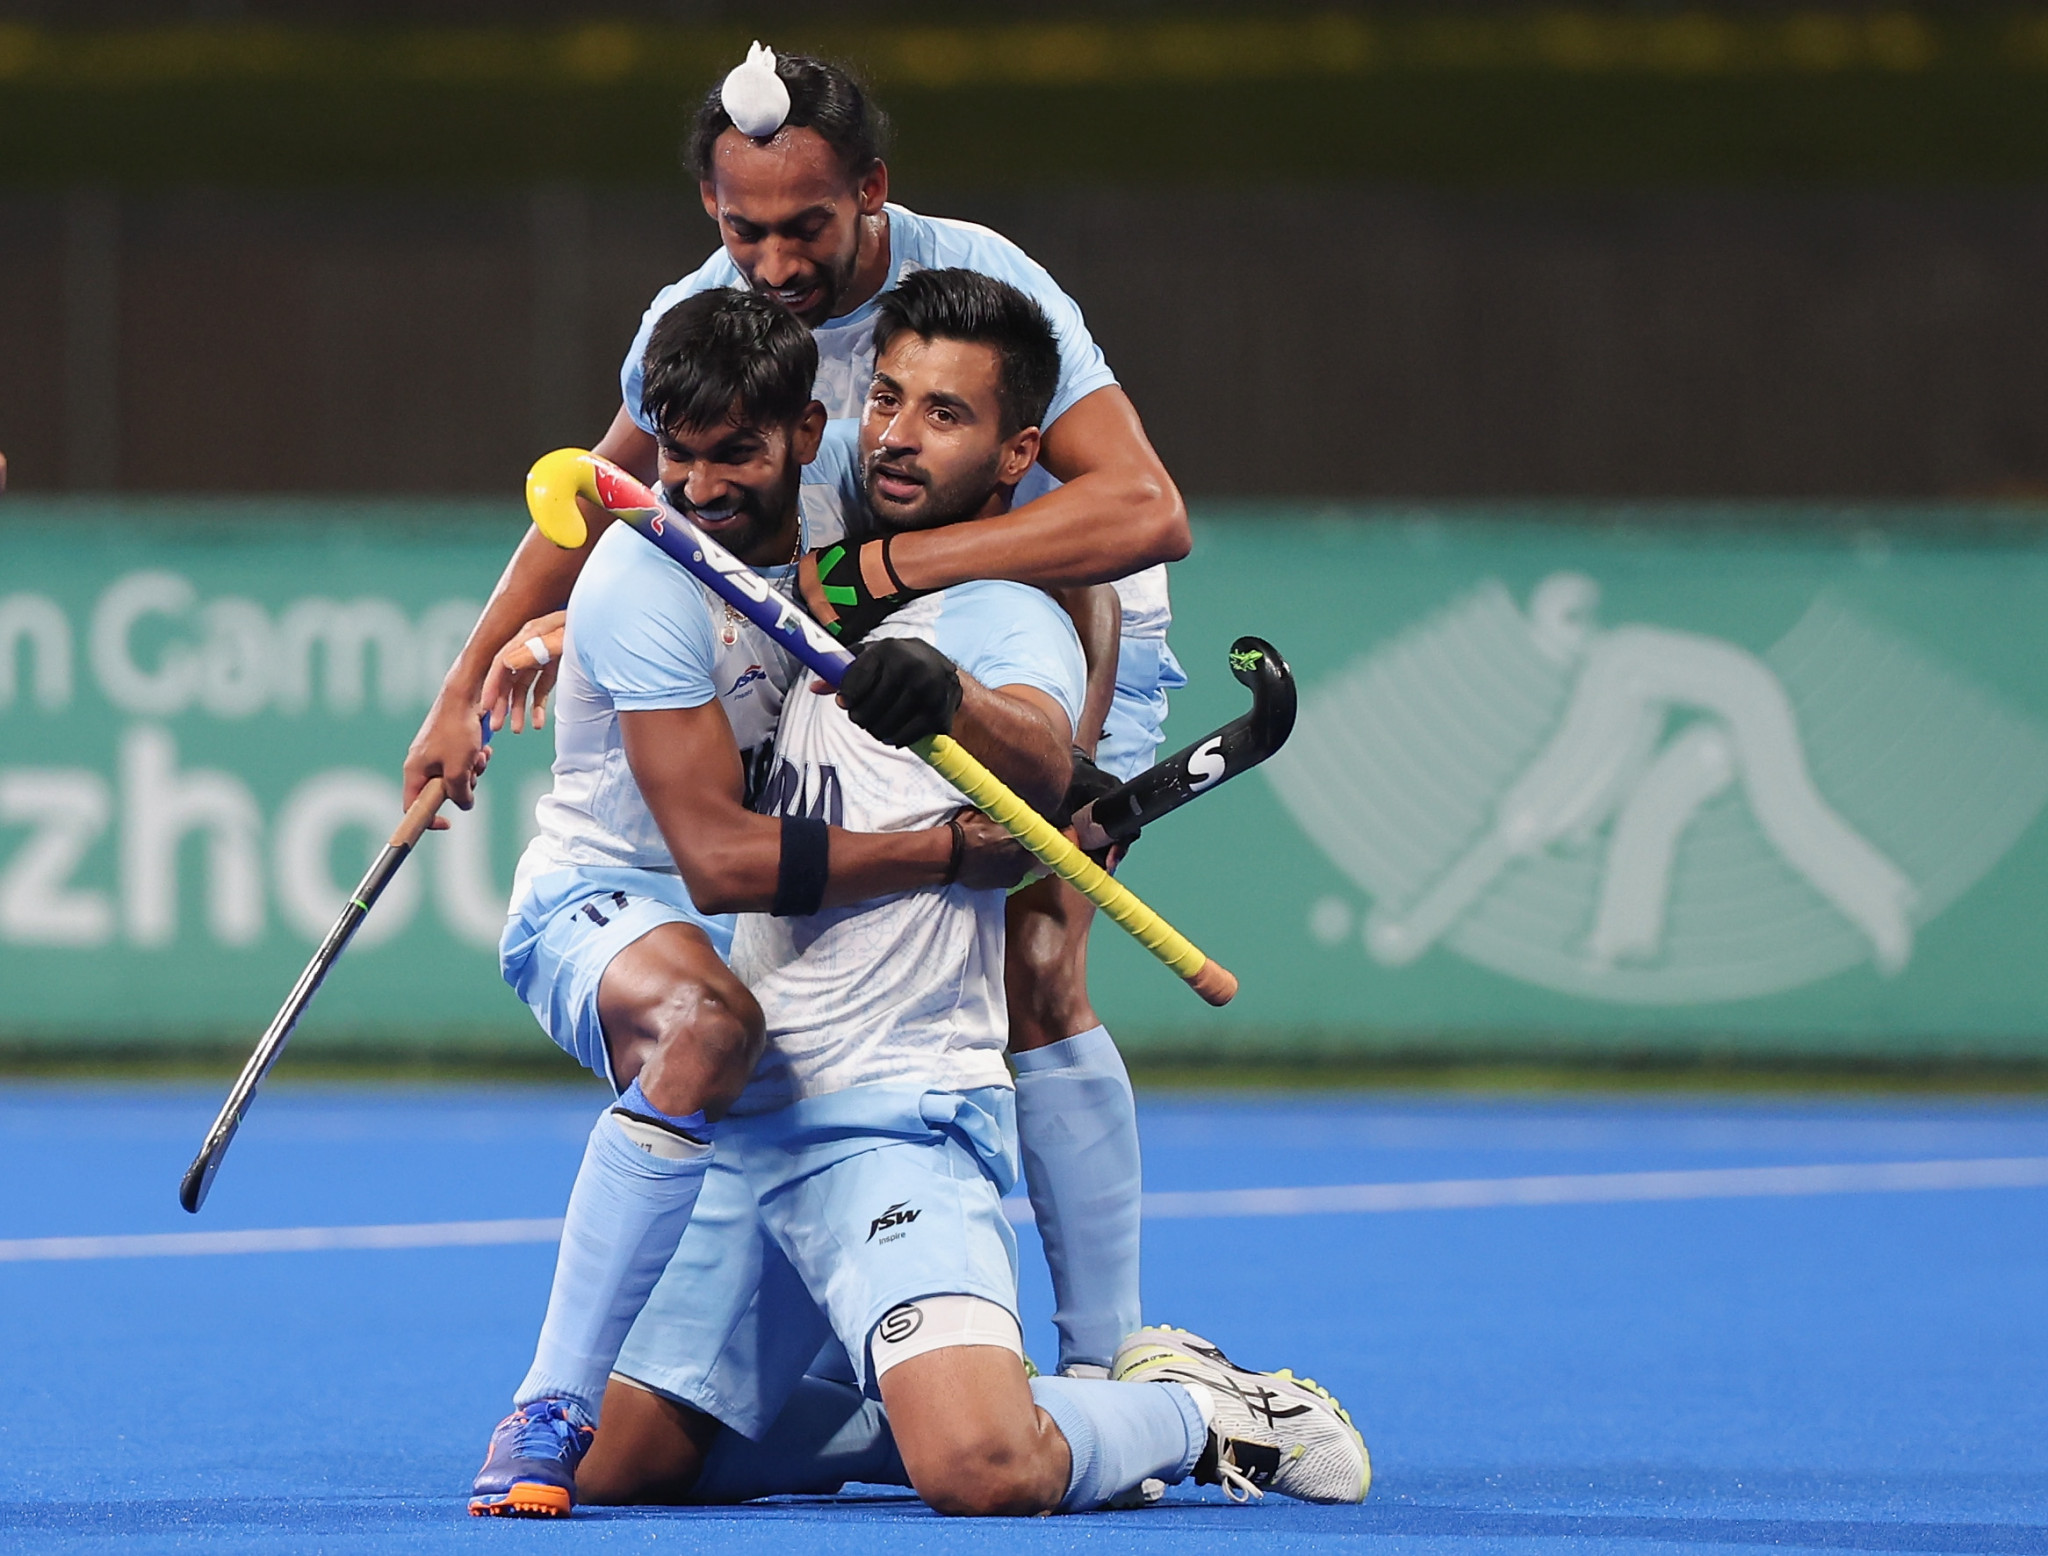 Paris 2024 hockey place confirmed for India after Asian Games triumph